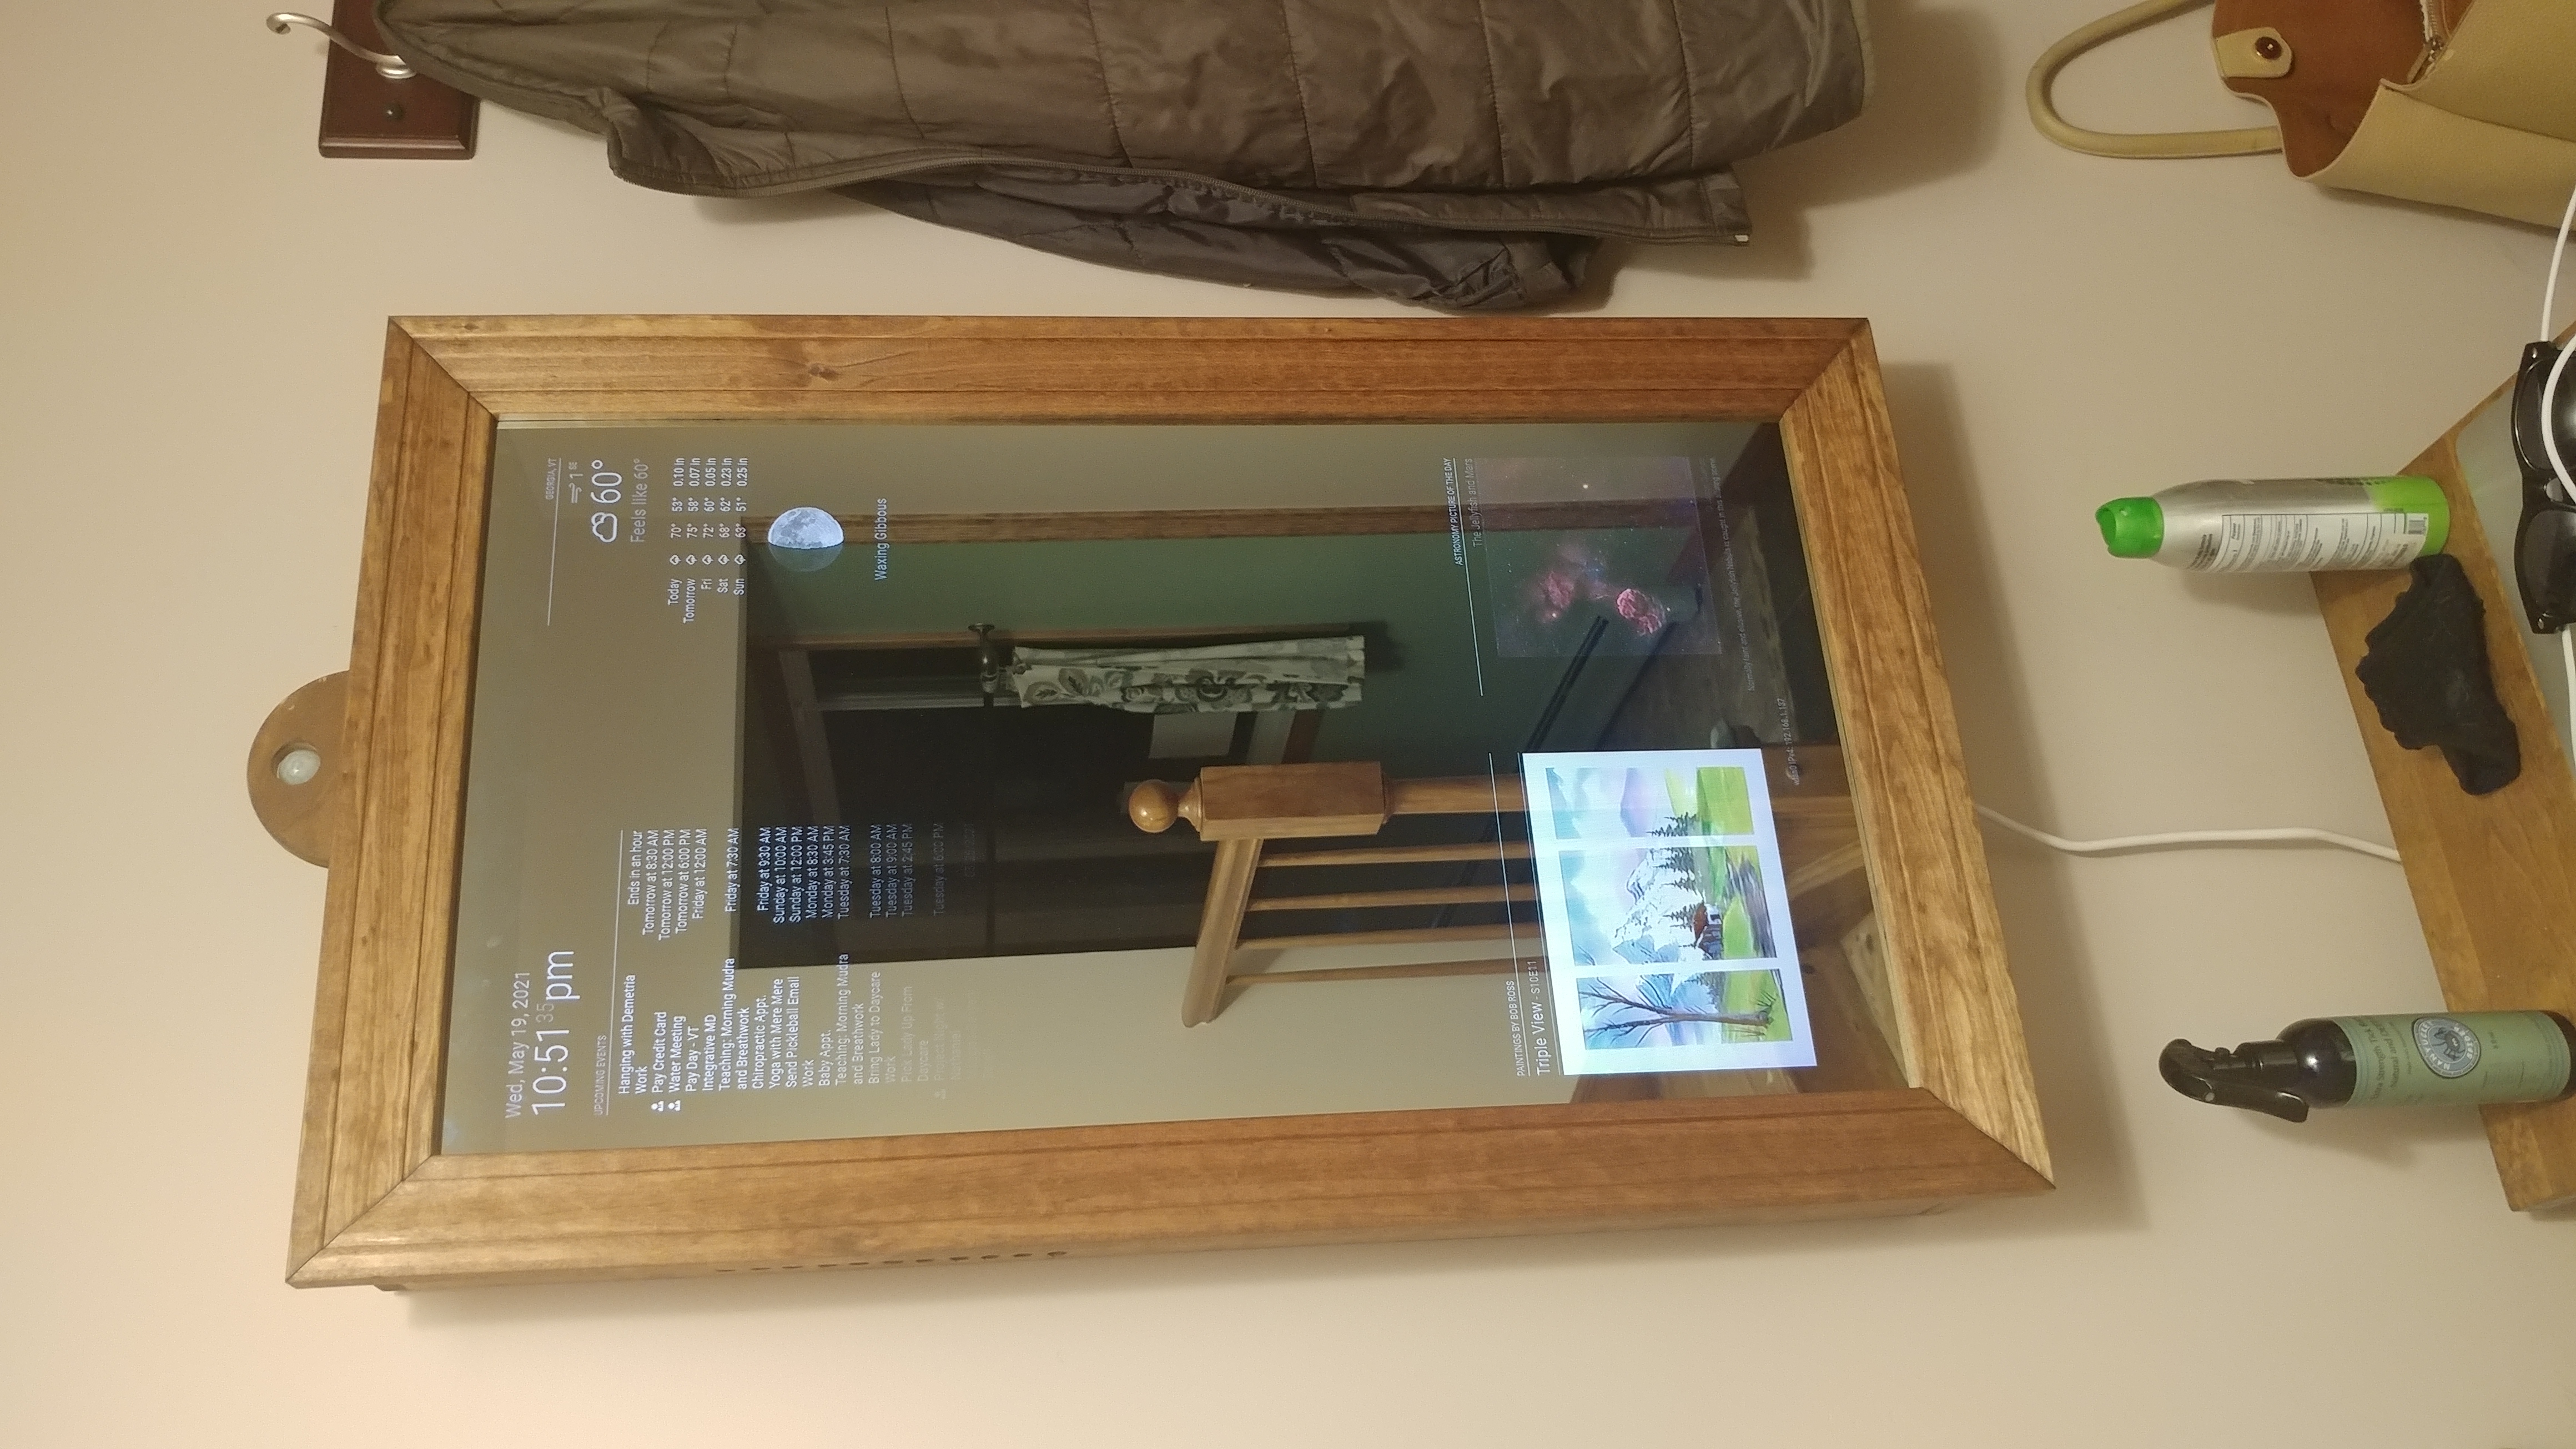 The finished Magic Mirror